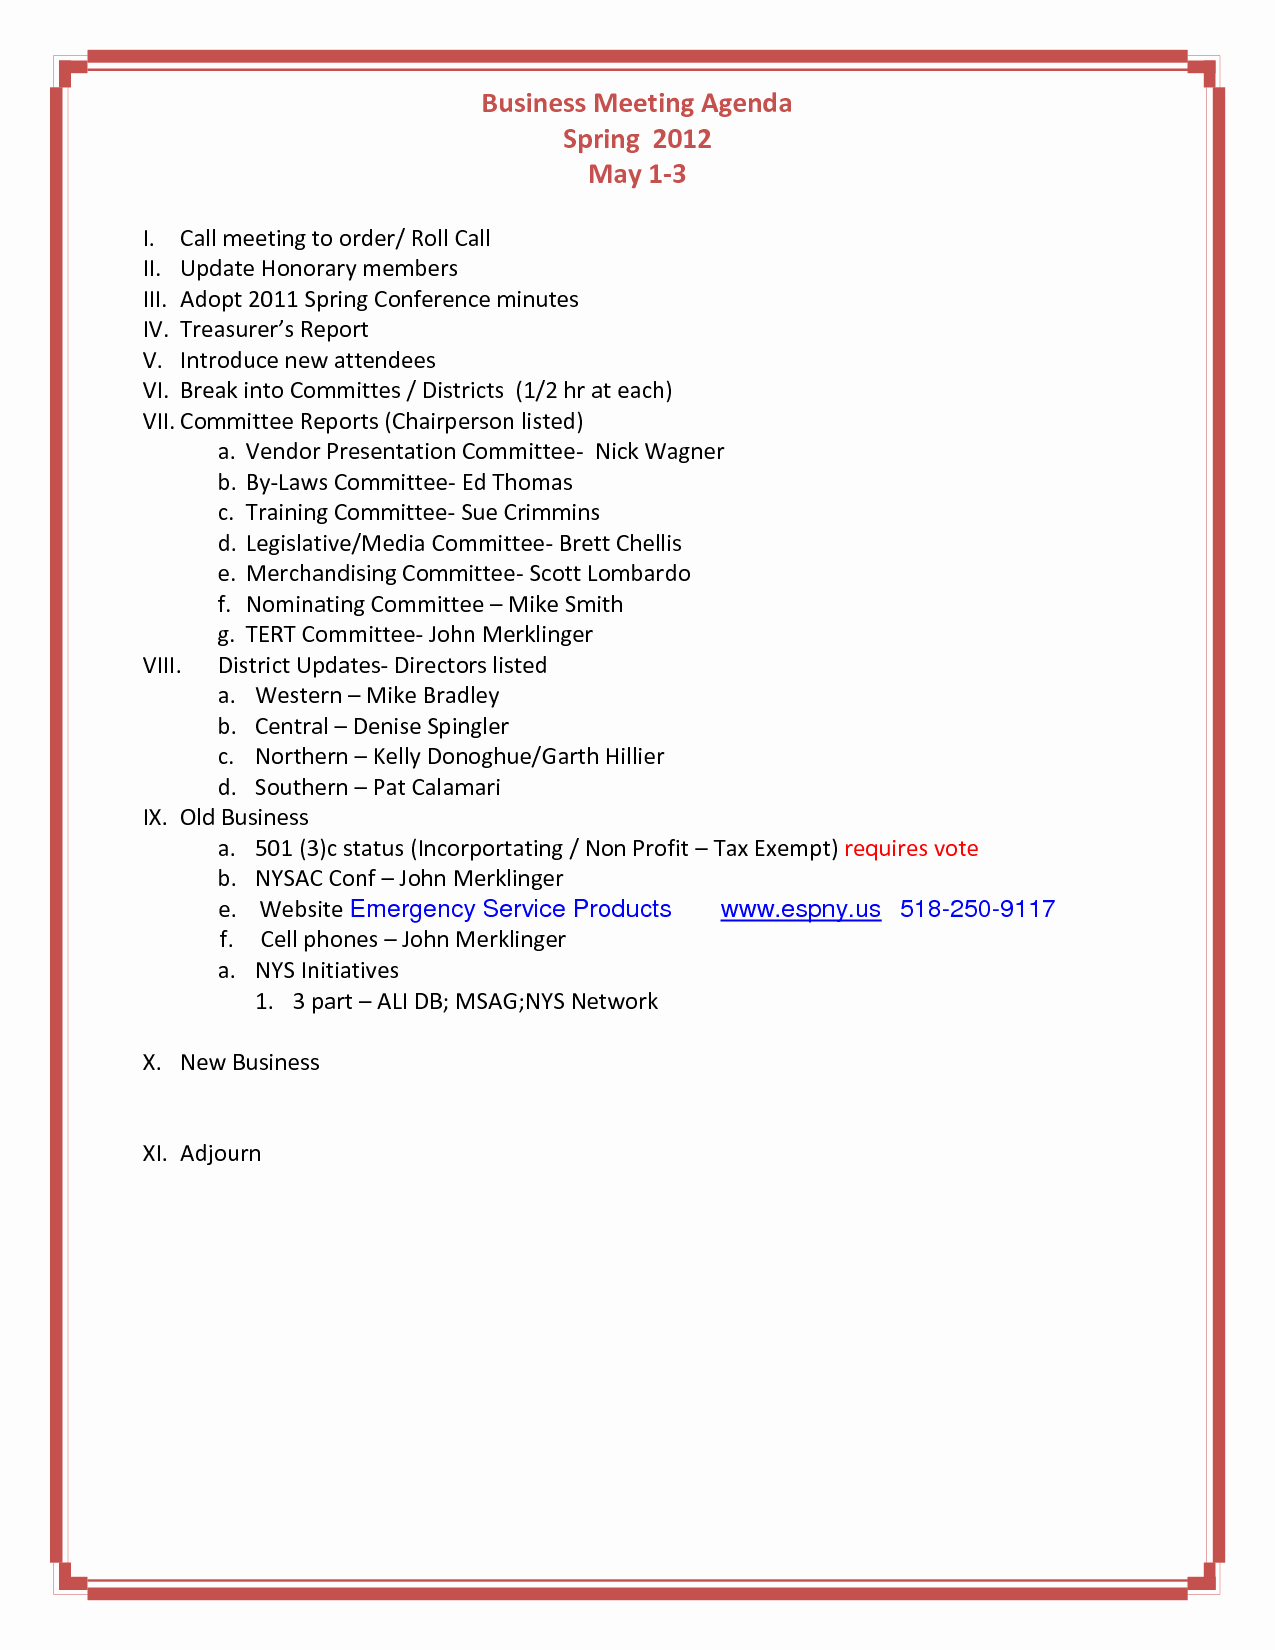 Business Meeting Agenda Template Fresh Easy to Use ordered Business Meeting Agenda Template